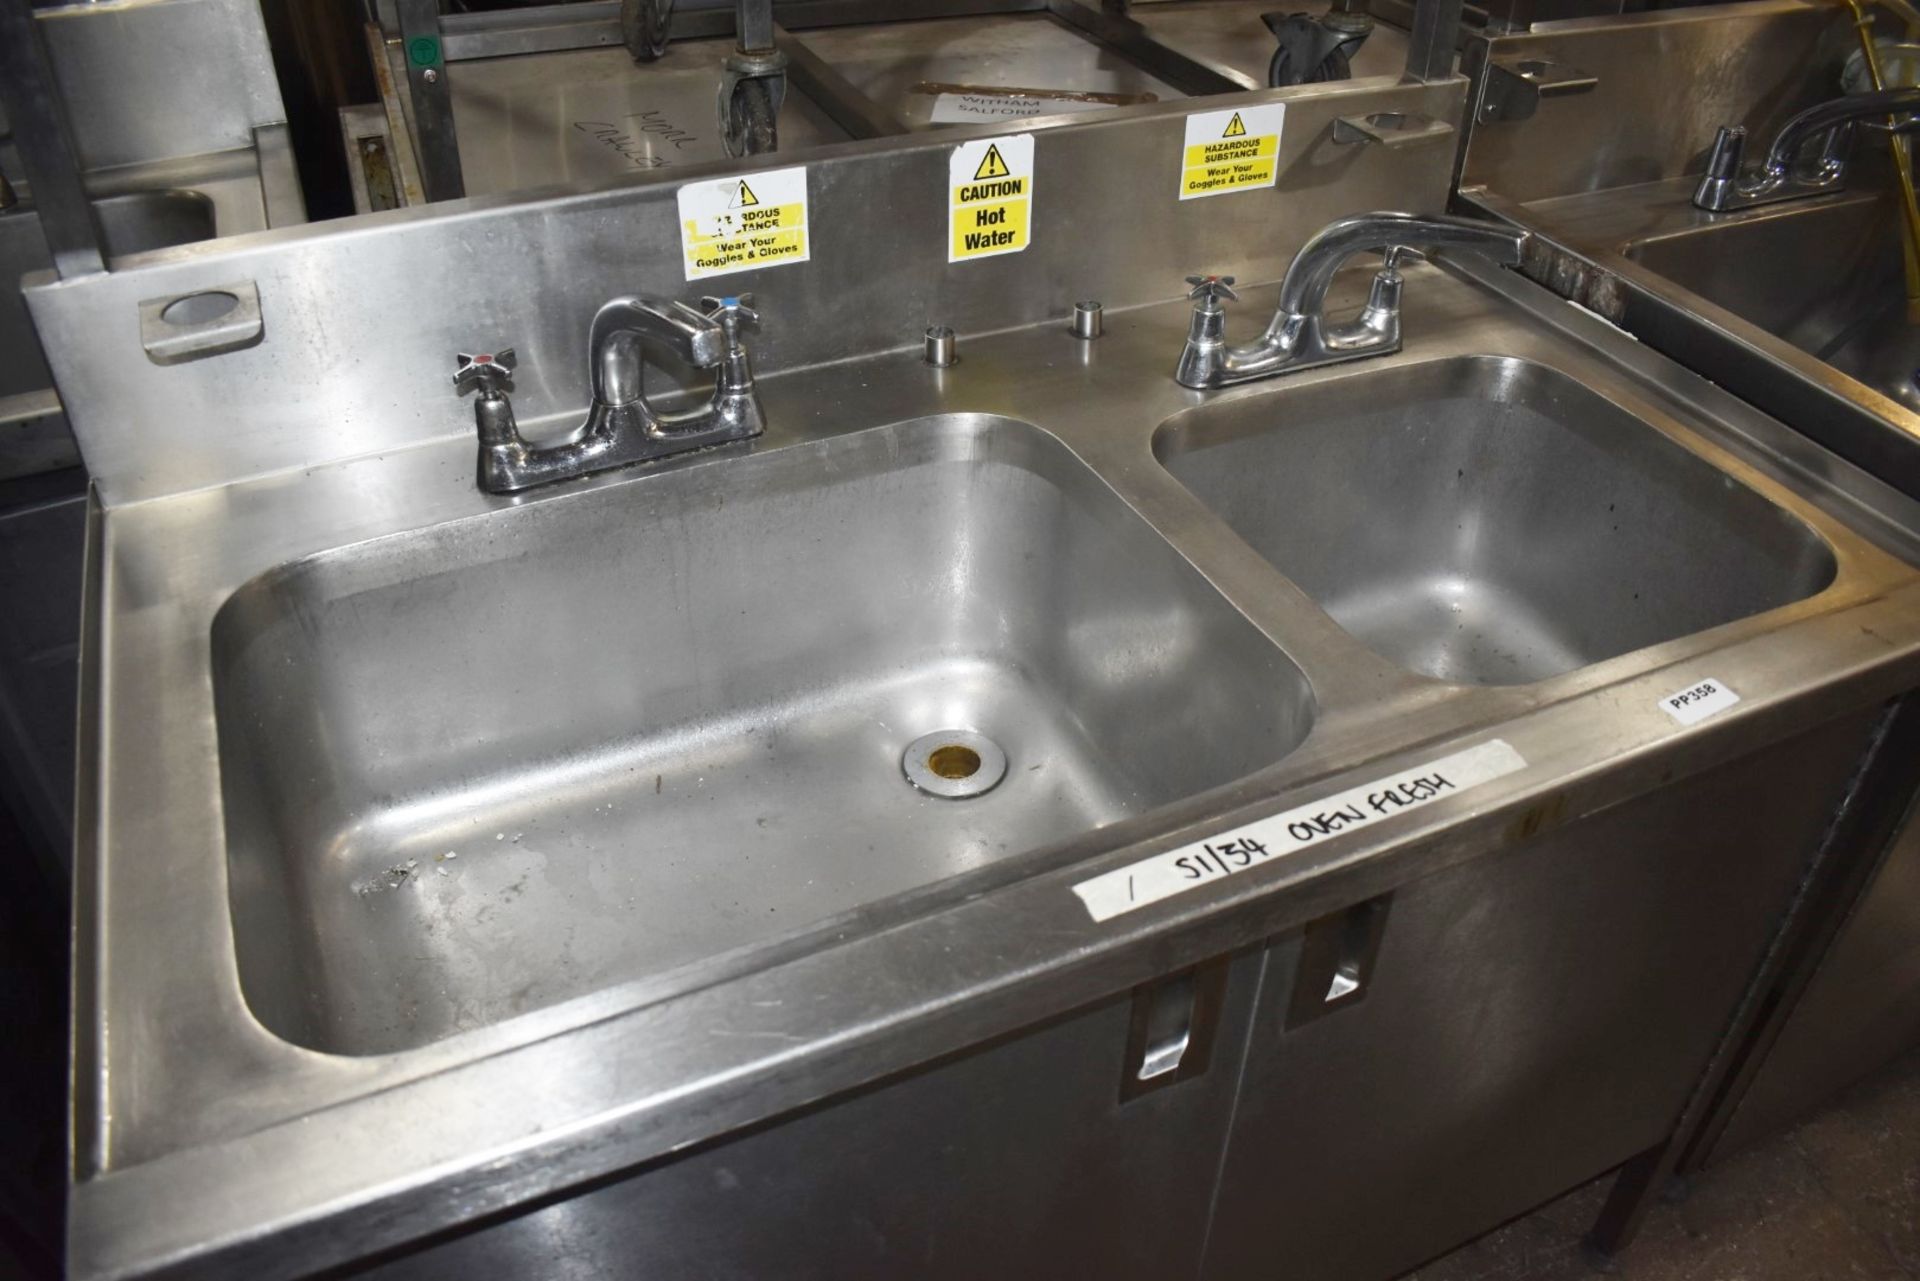 1 x Commercial Kitchen Wash Station With Two Large Sink Bowls, Mixer Taps, Overhead Drying Rack - Image 4 of 9